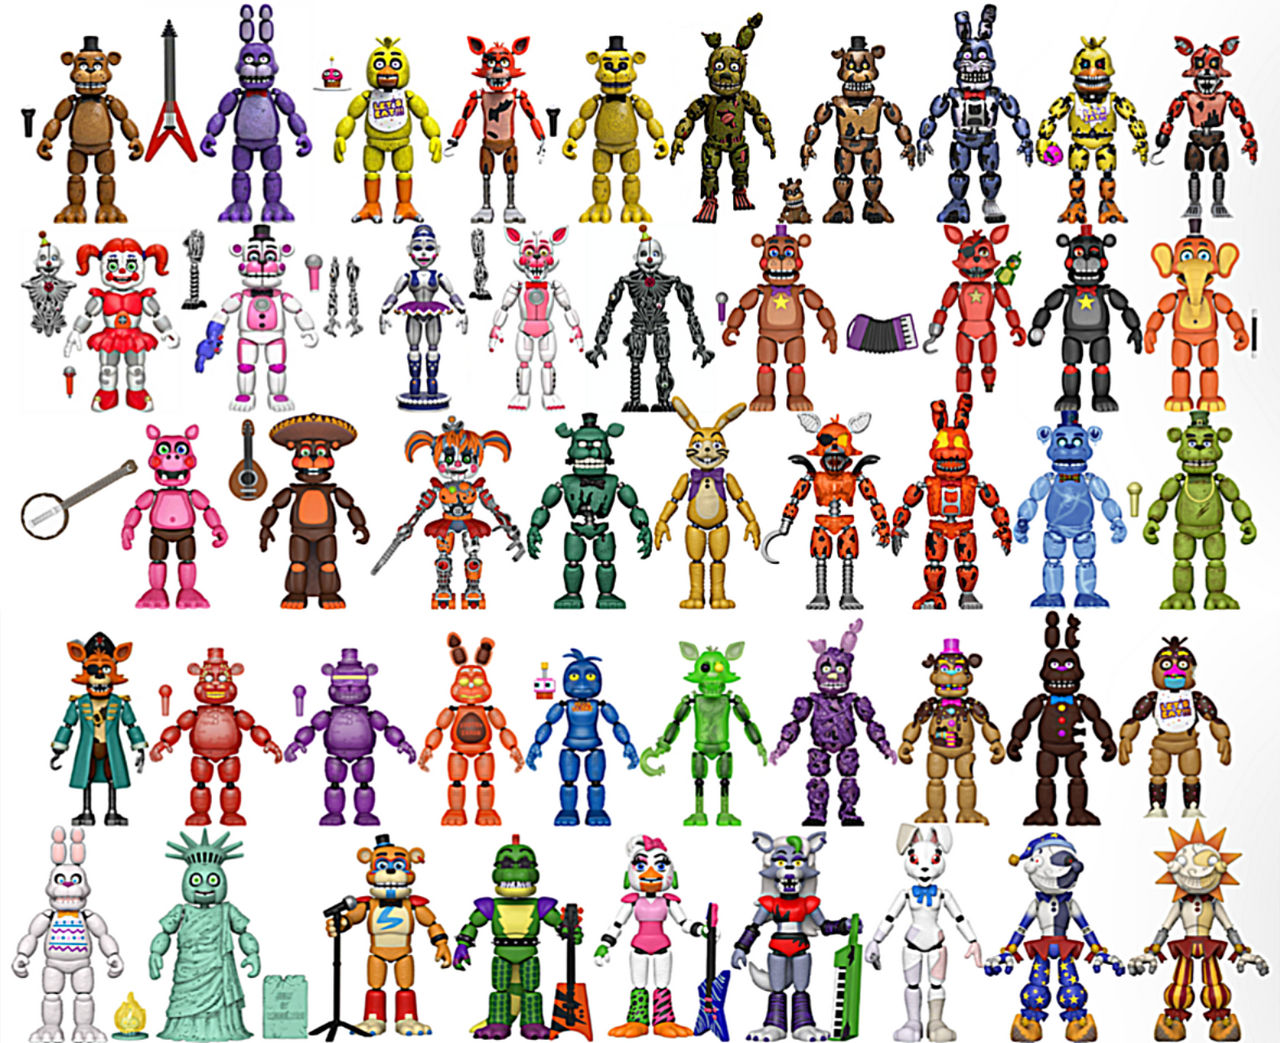 All FNAF Funko Action Figures!!! by CoolTeen15 on DeviantArt